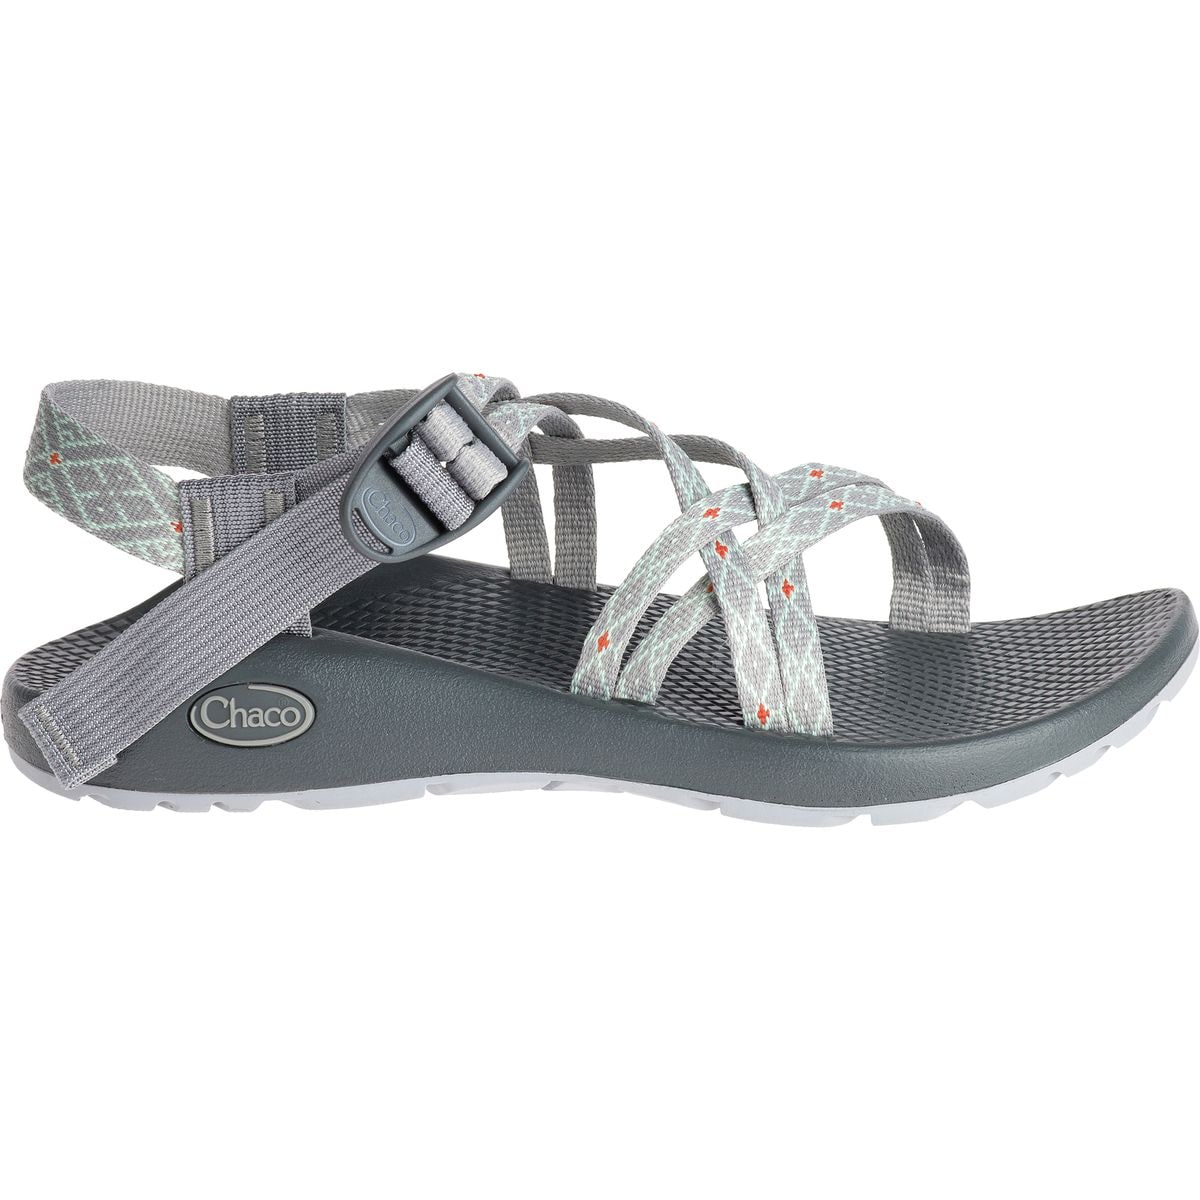 chaco zx1 classic sandal